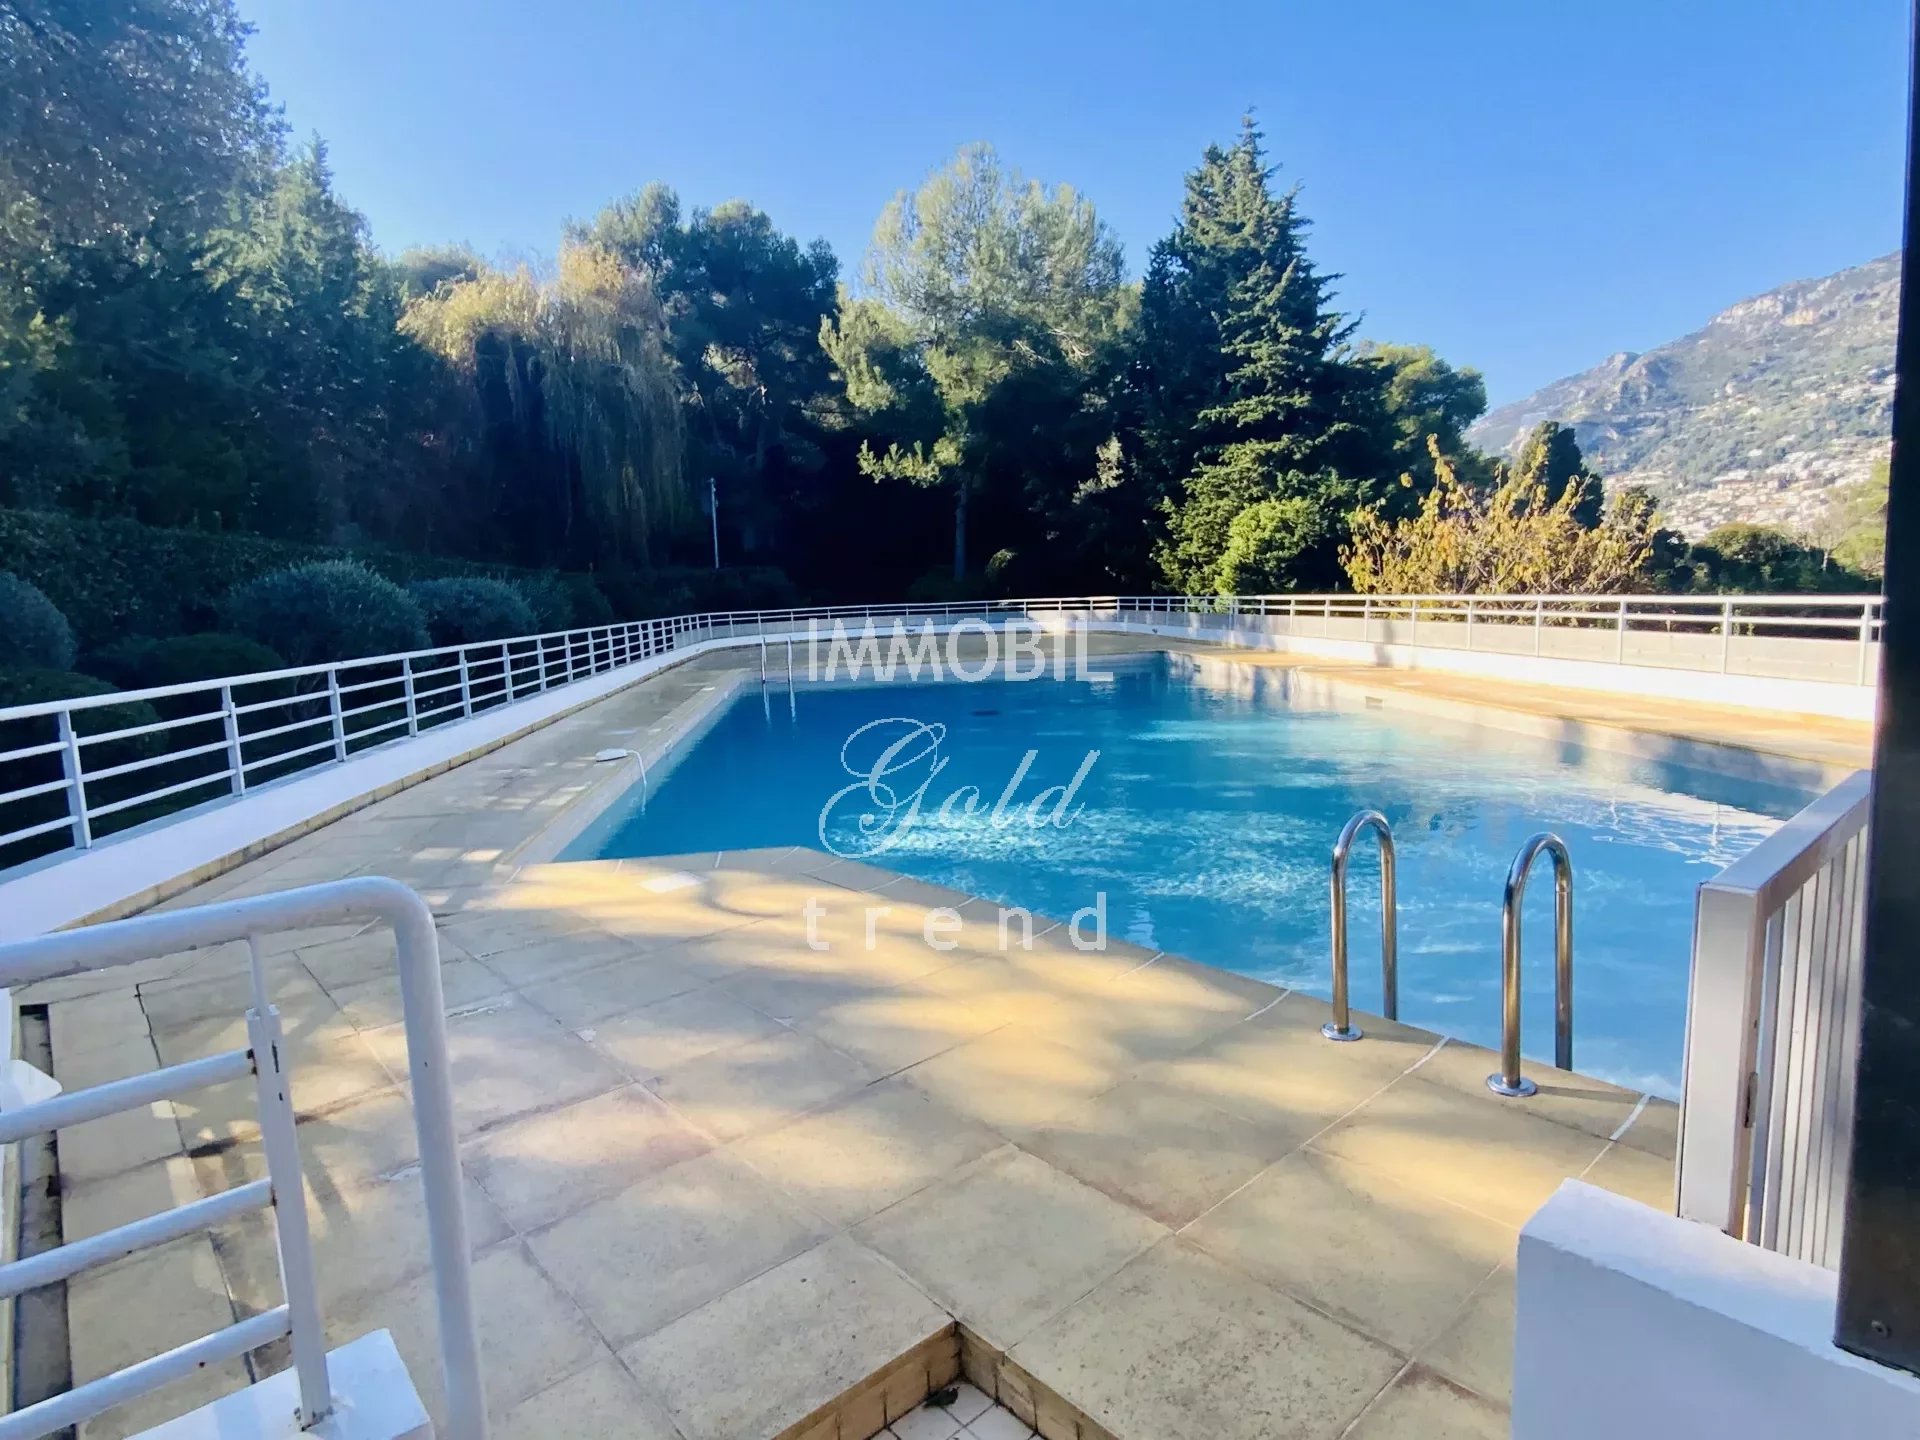 Real estate Roquebrune Cap Martin - For sale, two bedroom apartment with garden, parking and cellar, in a co-ownership with swimming pool